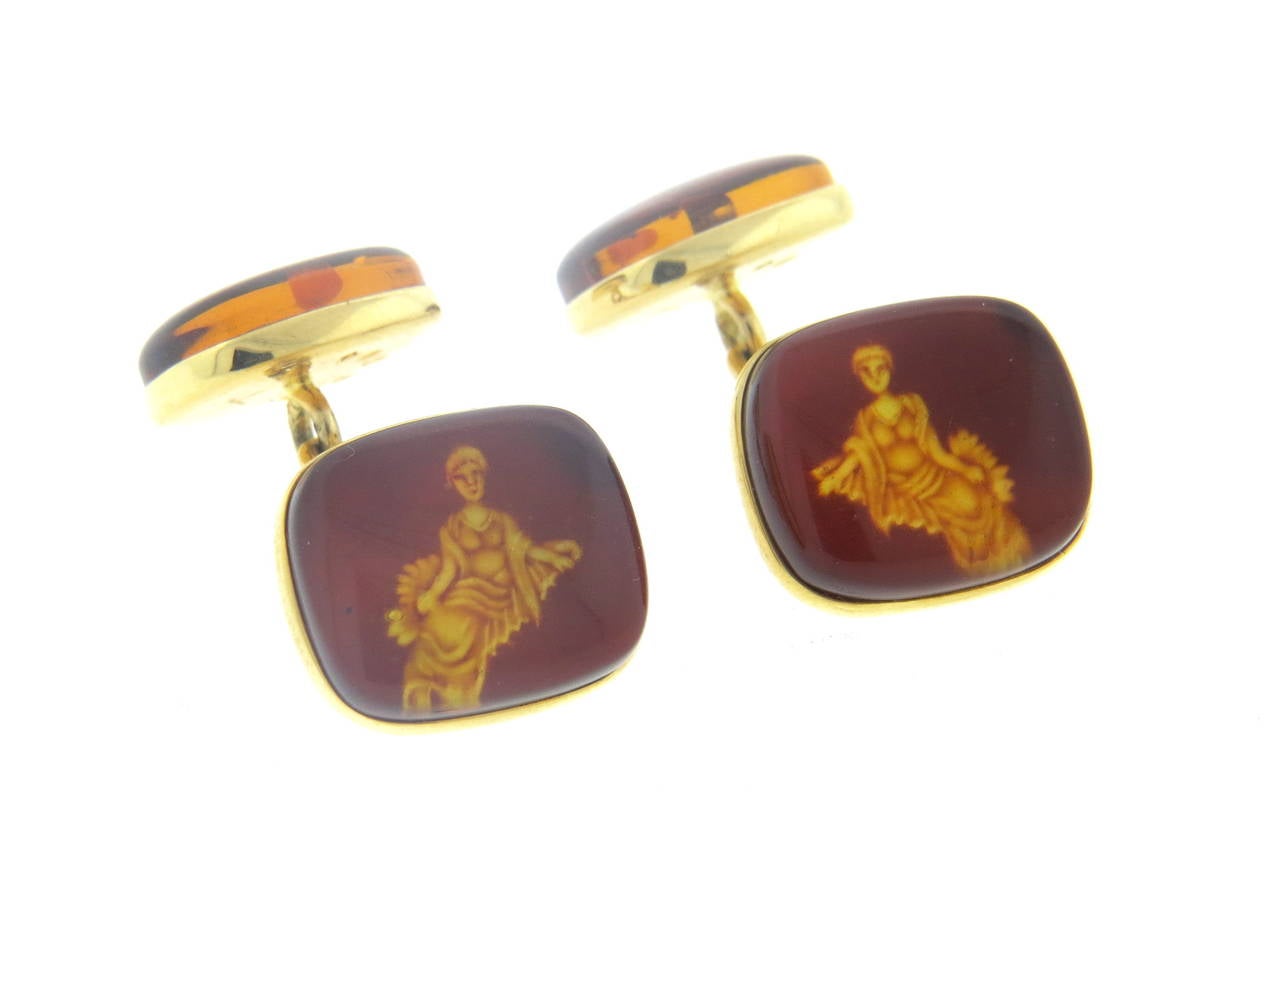 Pair of new 18k yellow gold cufflinks, crafted by Trianon, featuring amber top depicting Virgo zodiac sign. Top measures 15mm x 13mm, back - 13mm x 11mm. Marked Trianon, 750. Weight - 8.1 grams
Retail $3000